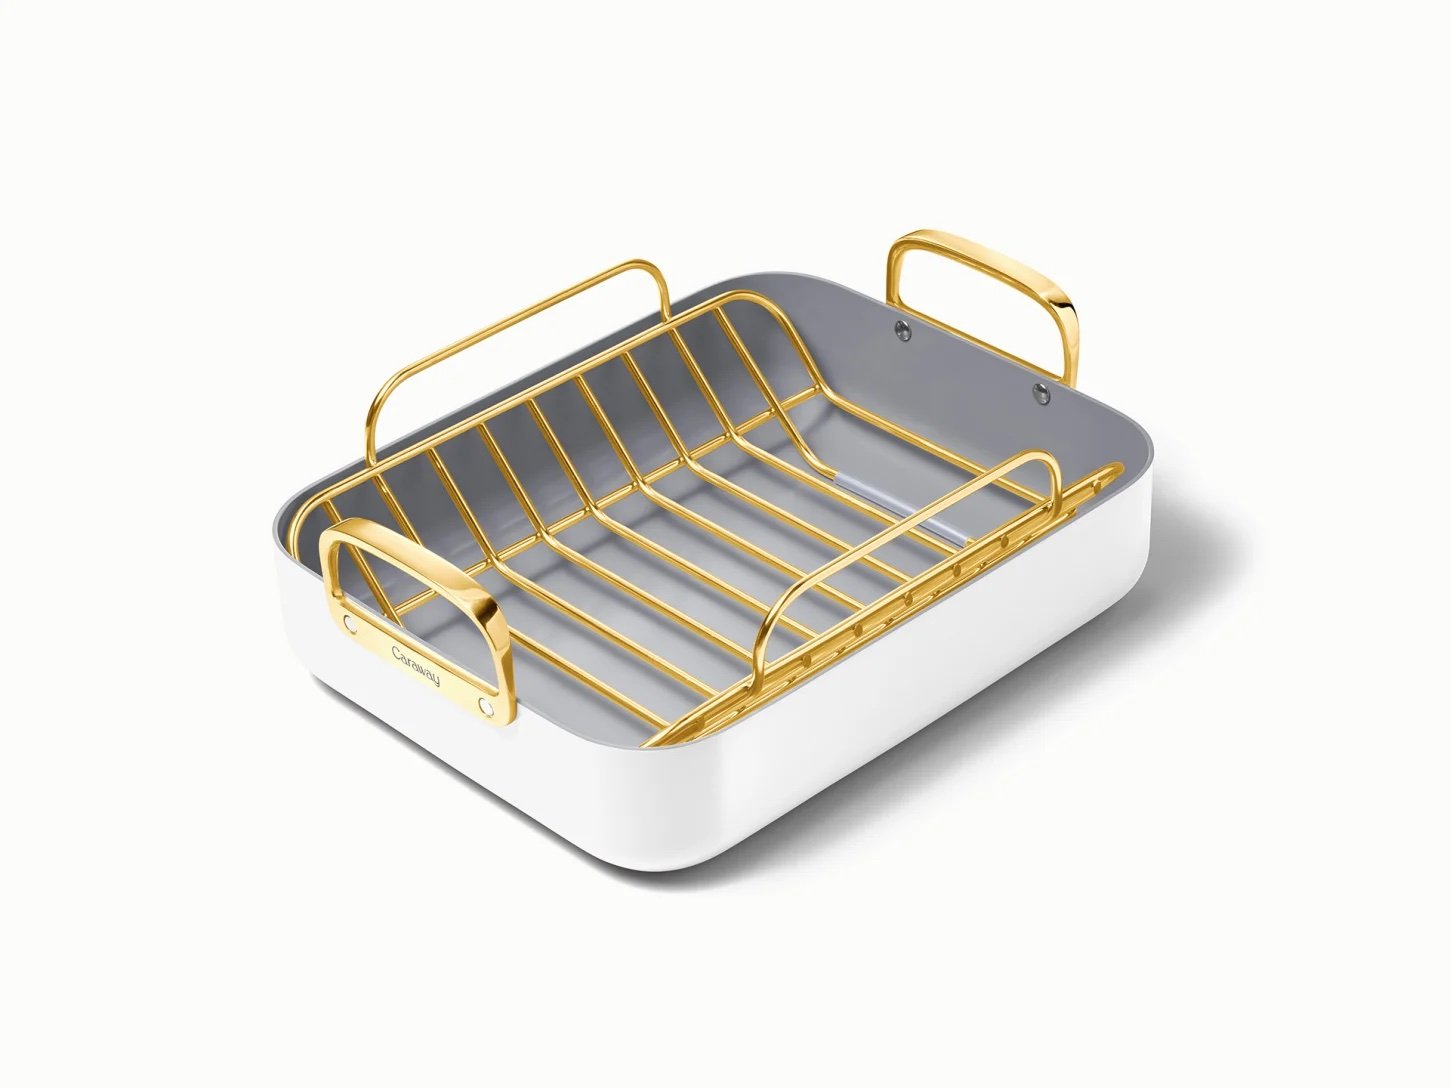 Electric Warming Tray with Adjustable Temperature, Laudlife 5 in 1 Food Warmer for Parties Features Foldable Design & Fast Heating, Warming Plate